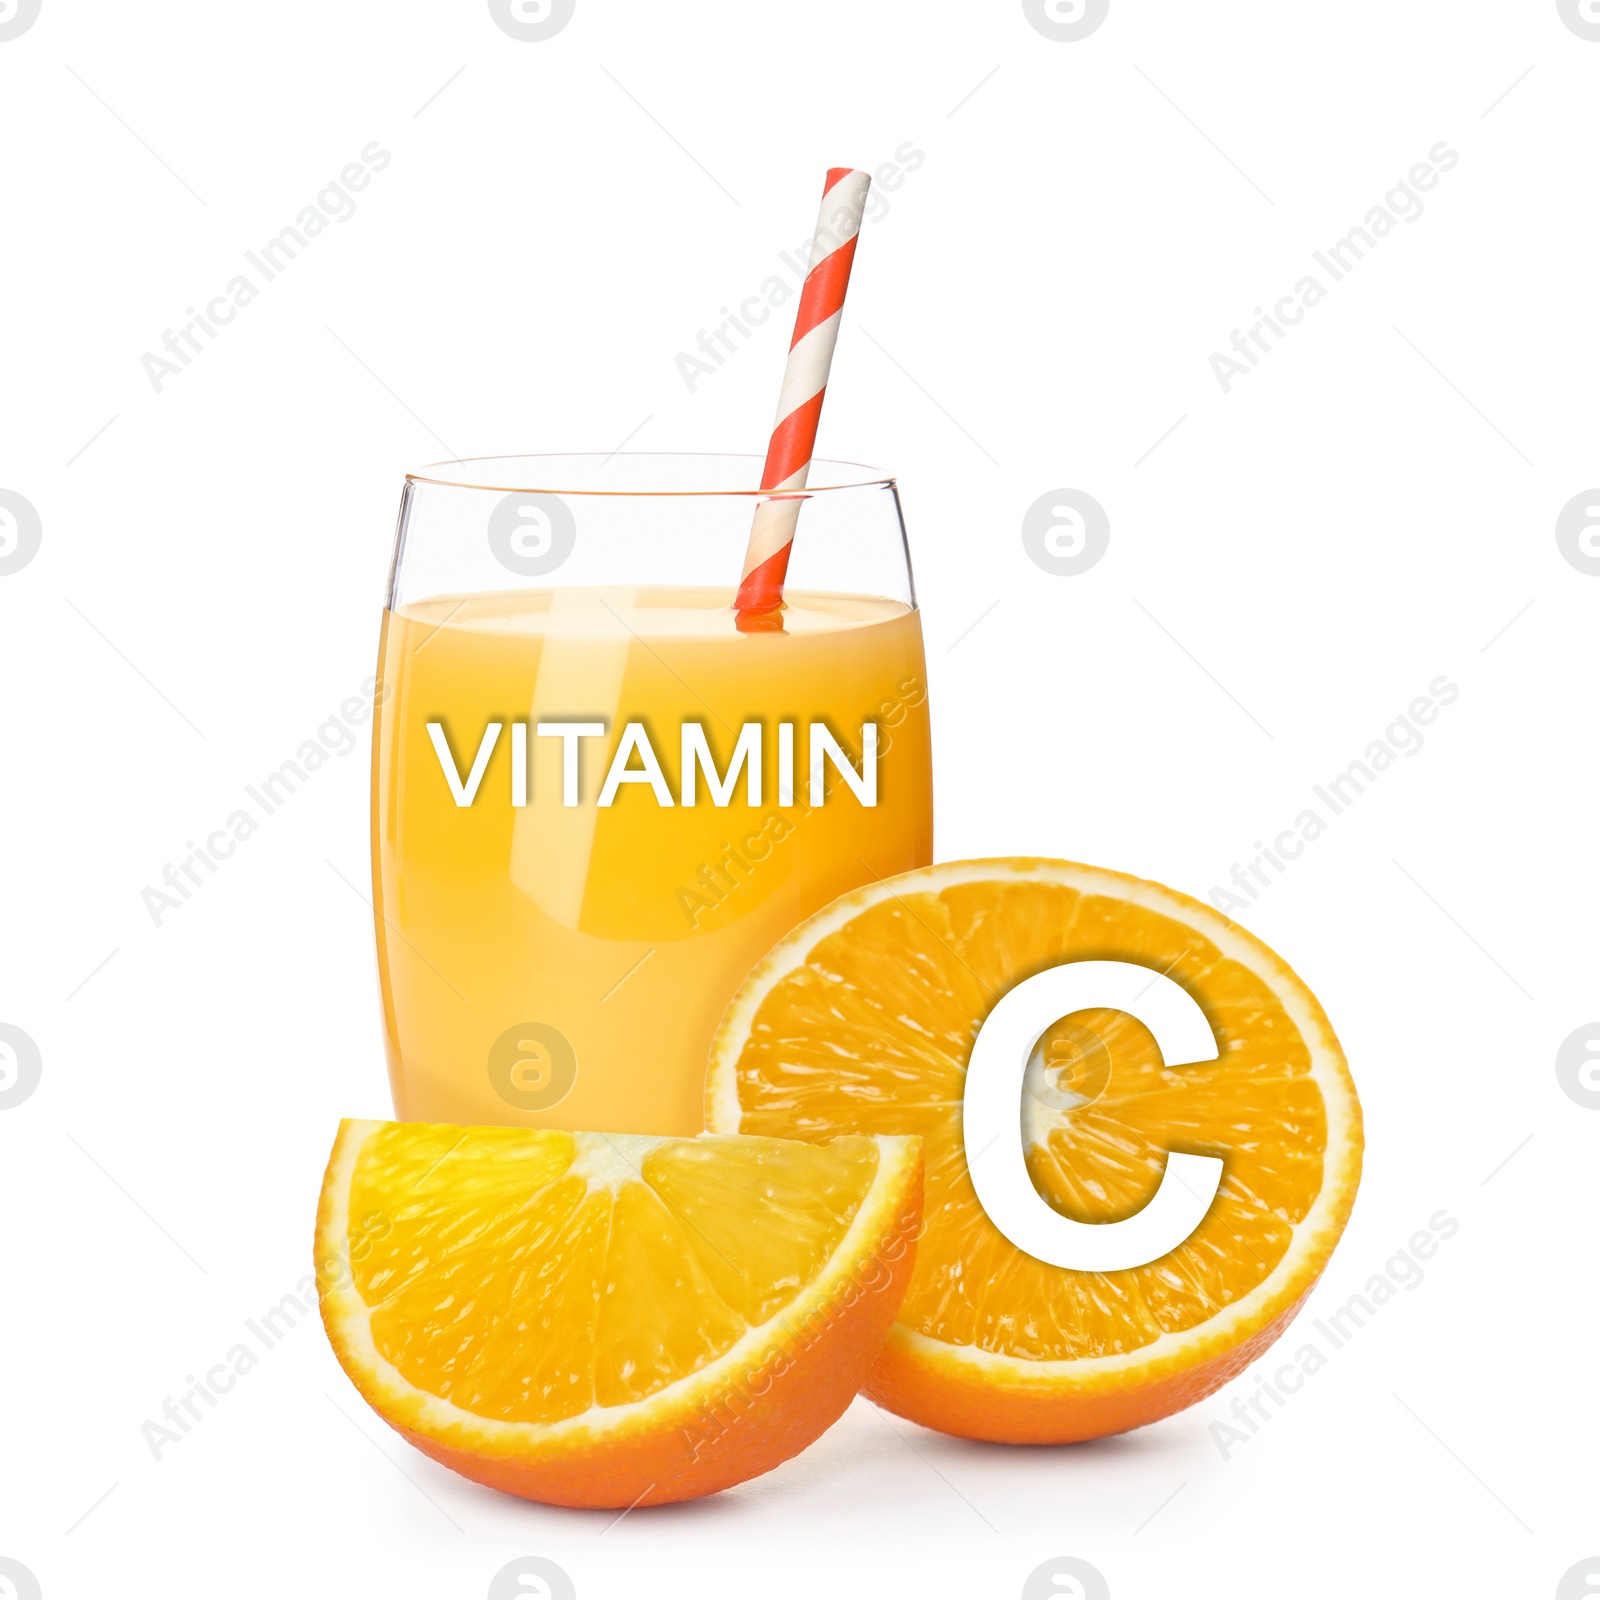 Image of Source of Vitamin C. Glass of orange juice and fresh fruits on white background